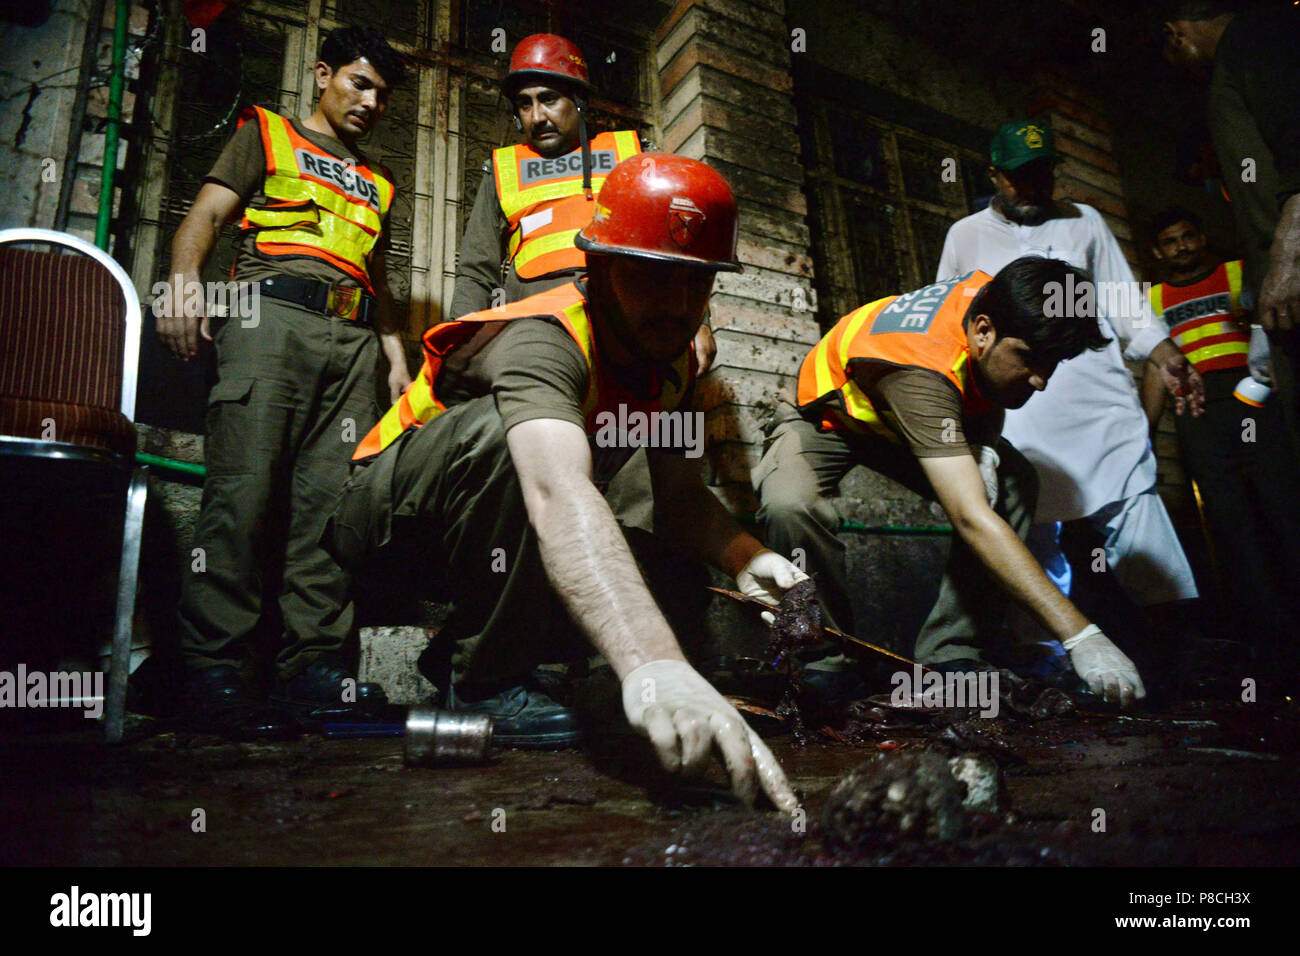 Peshawar, Pakistan. 10th July, 2018. Rescuers work at the blast site in Peshawar, northwest Pakistan, on July 10, 2018. At least 13 people were killed and dozens of others injured in a blast that hit a public gathering of a political party in Pakistan's northwest provincial capital of Peshawar on Tuesday night, local media reported. Credit: Umar Qayyum/Xinhua/Alamy Live News Stock Photo